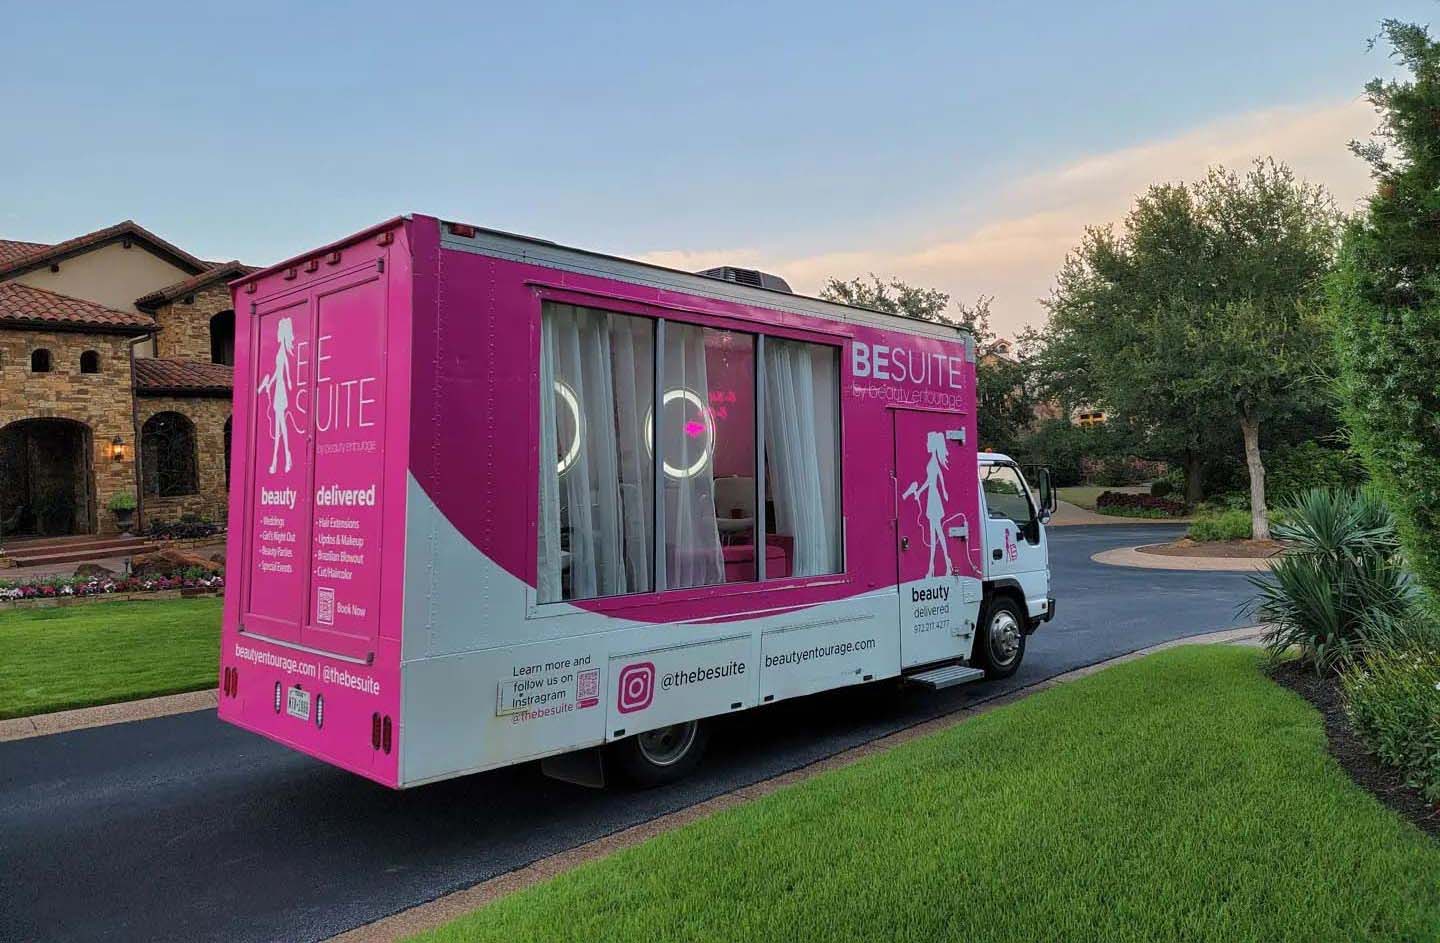 Besuite beauty mobile in a suburb